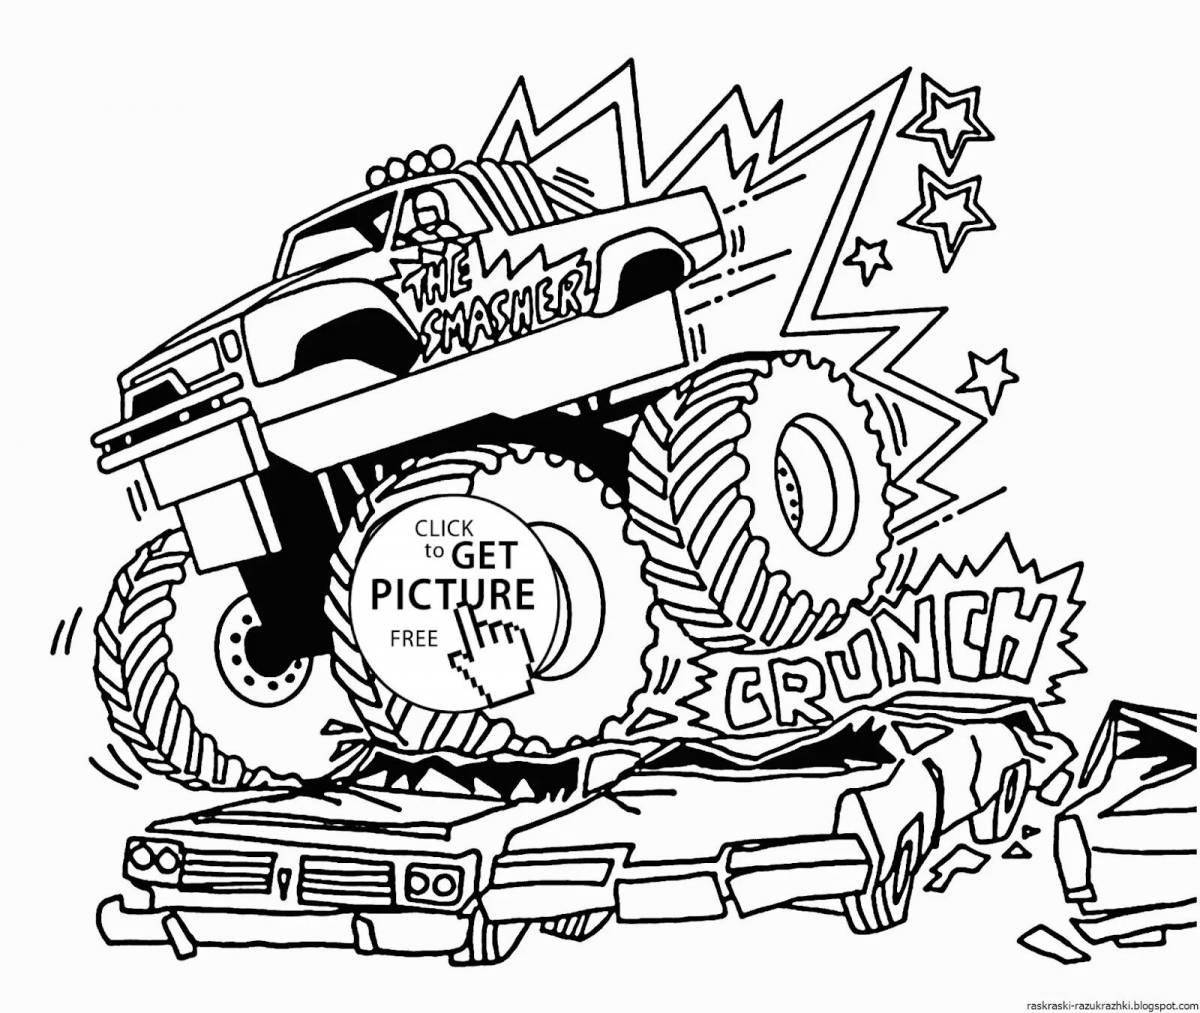 Fantastic monster truck coloring page for boys